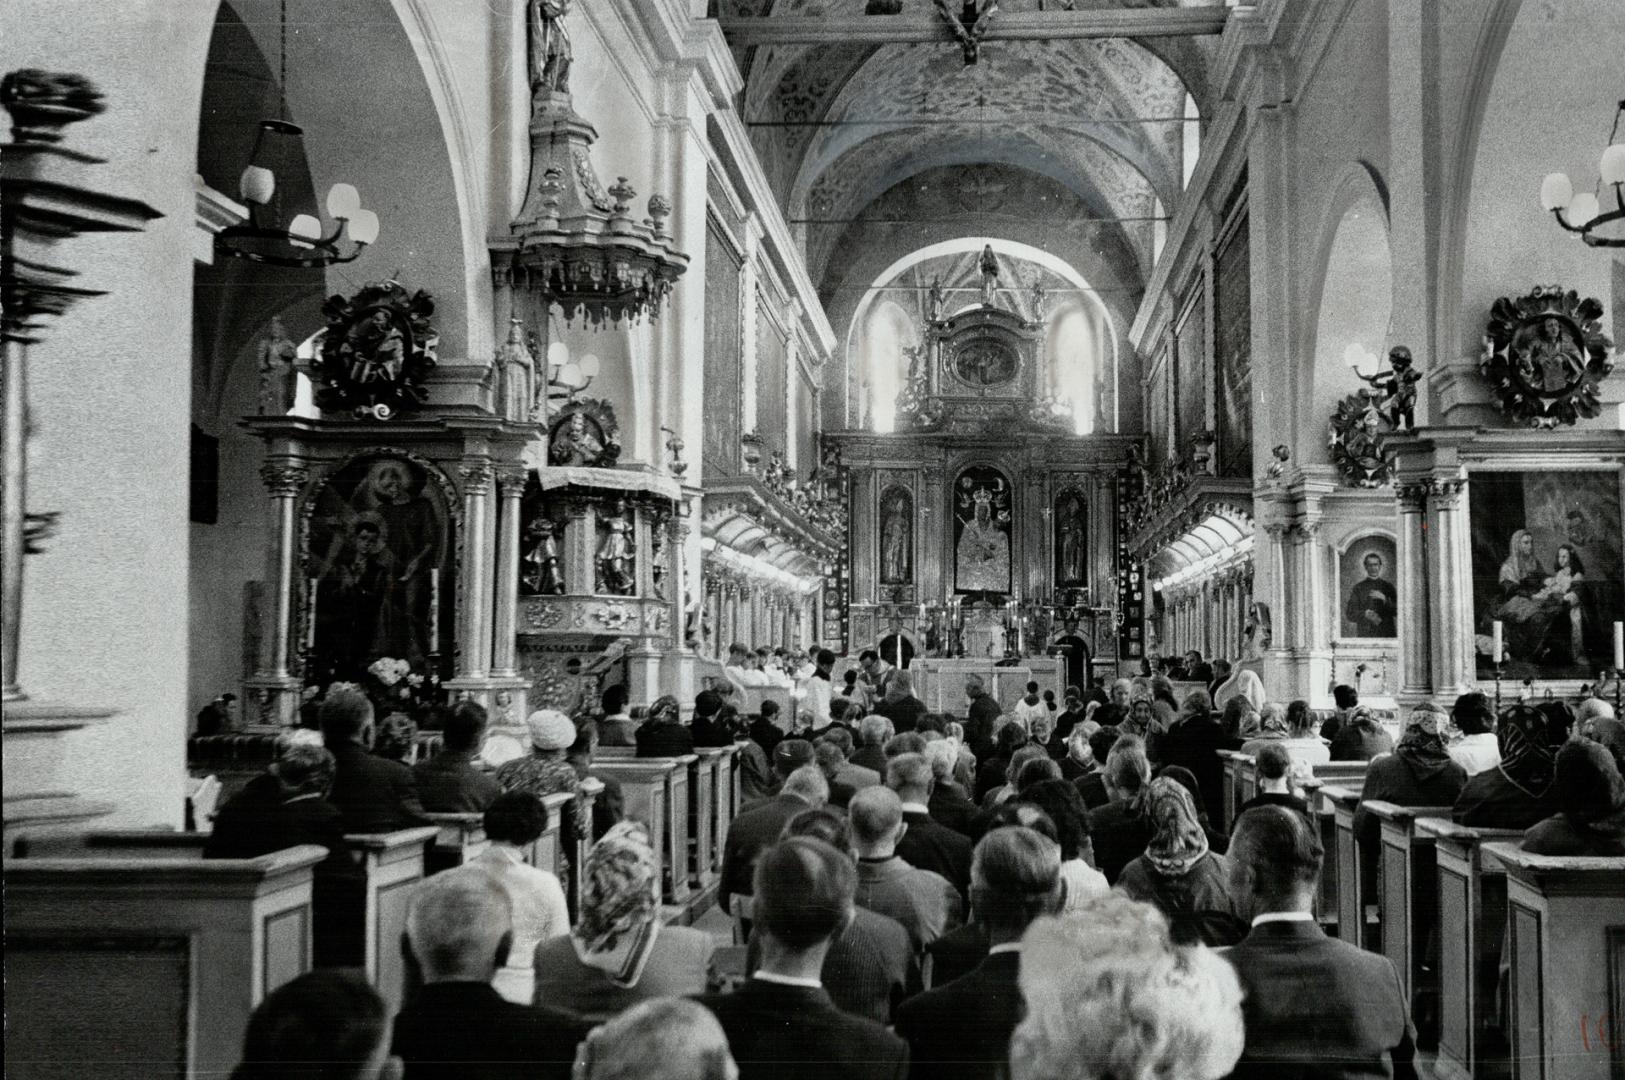 Catholics worship in Warsaw church in new co-existence between Catholic Church and Communist regime